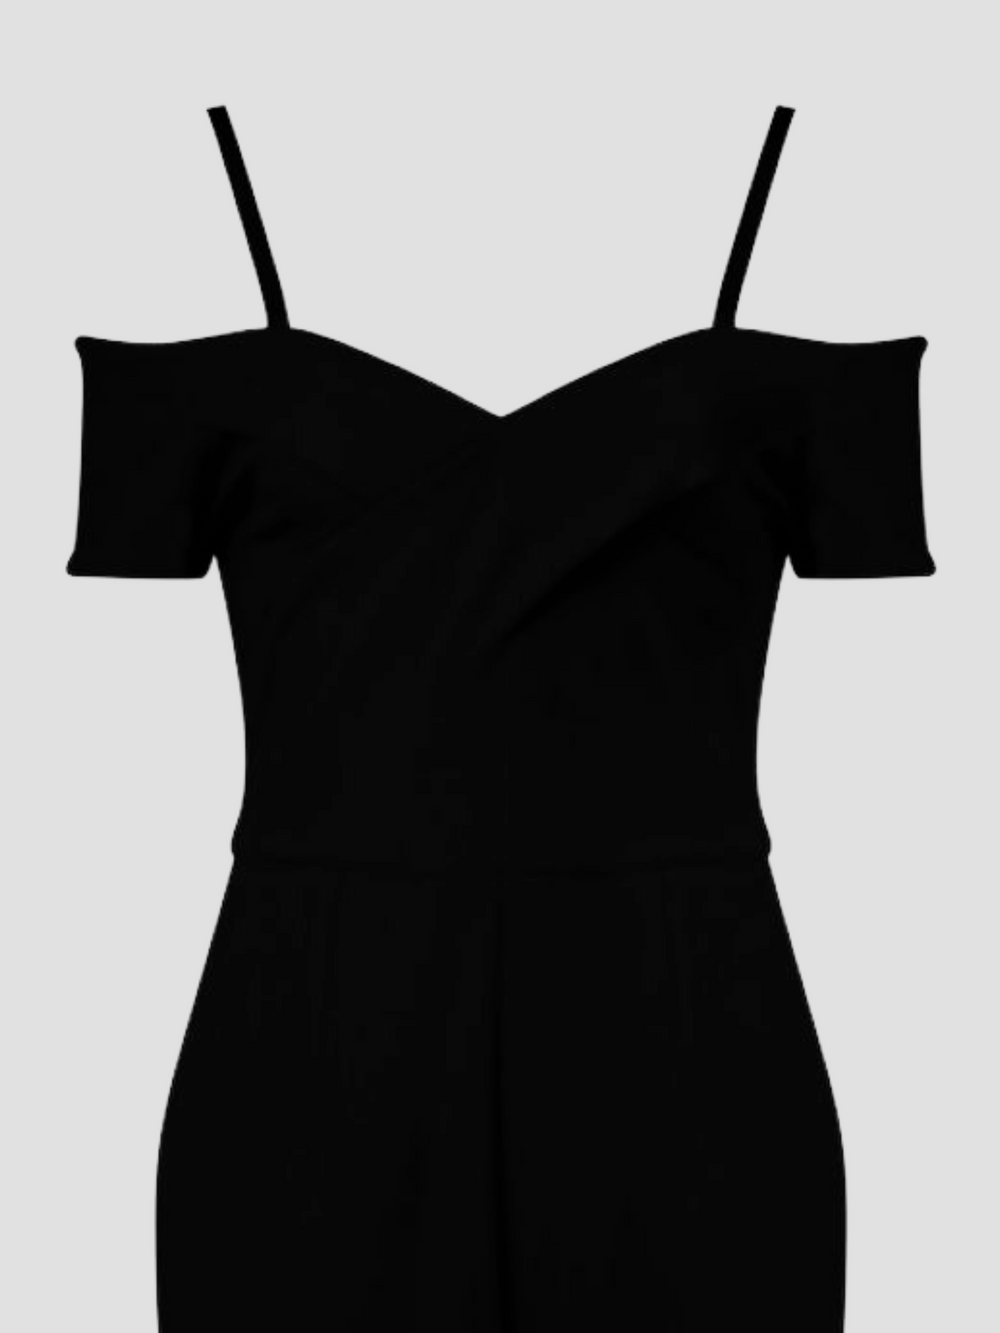 A closeup of a ghost manequin wearing a bardot style neckline and adjustable straps. The jumpsuit has a tailored fit  with zip back fastening.  The closeup demonstrates the bardot style cut. 